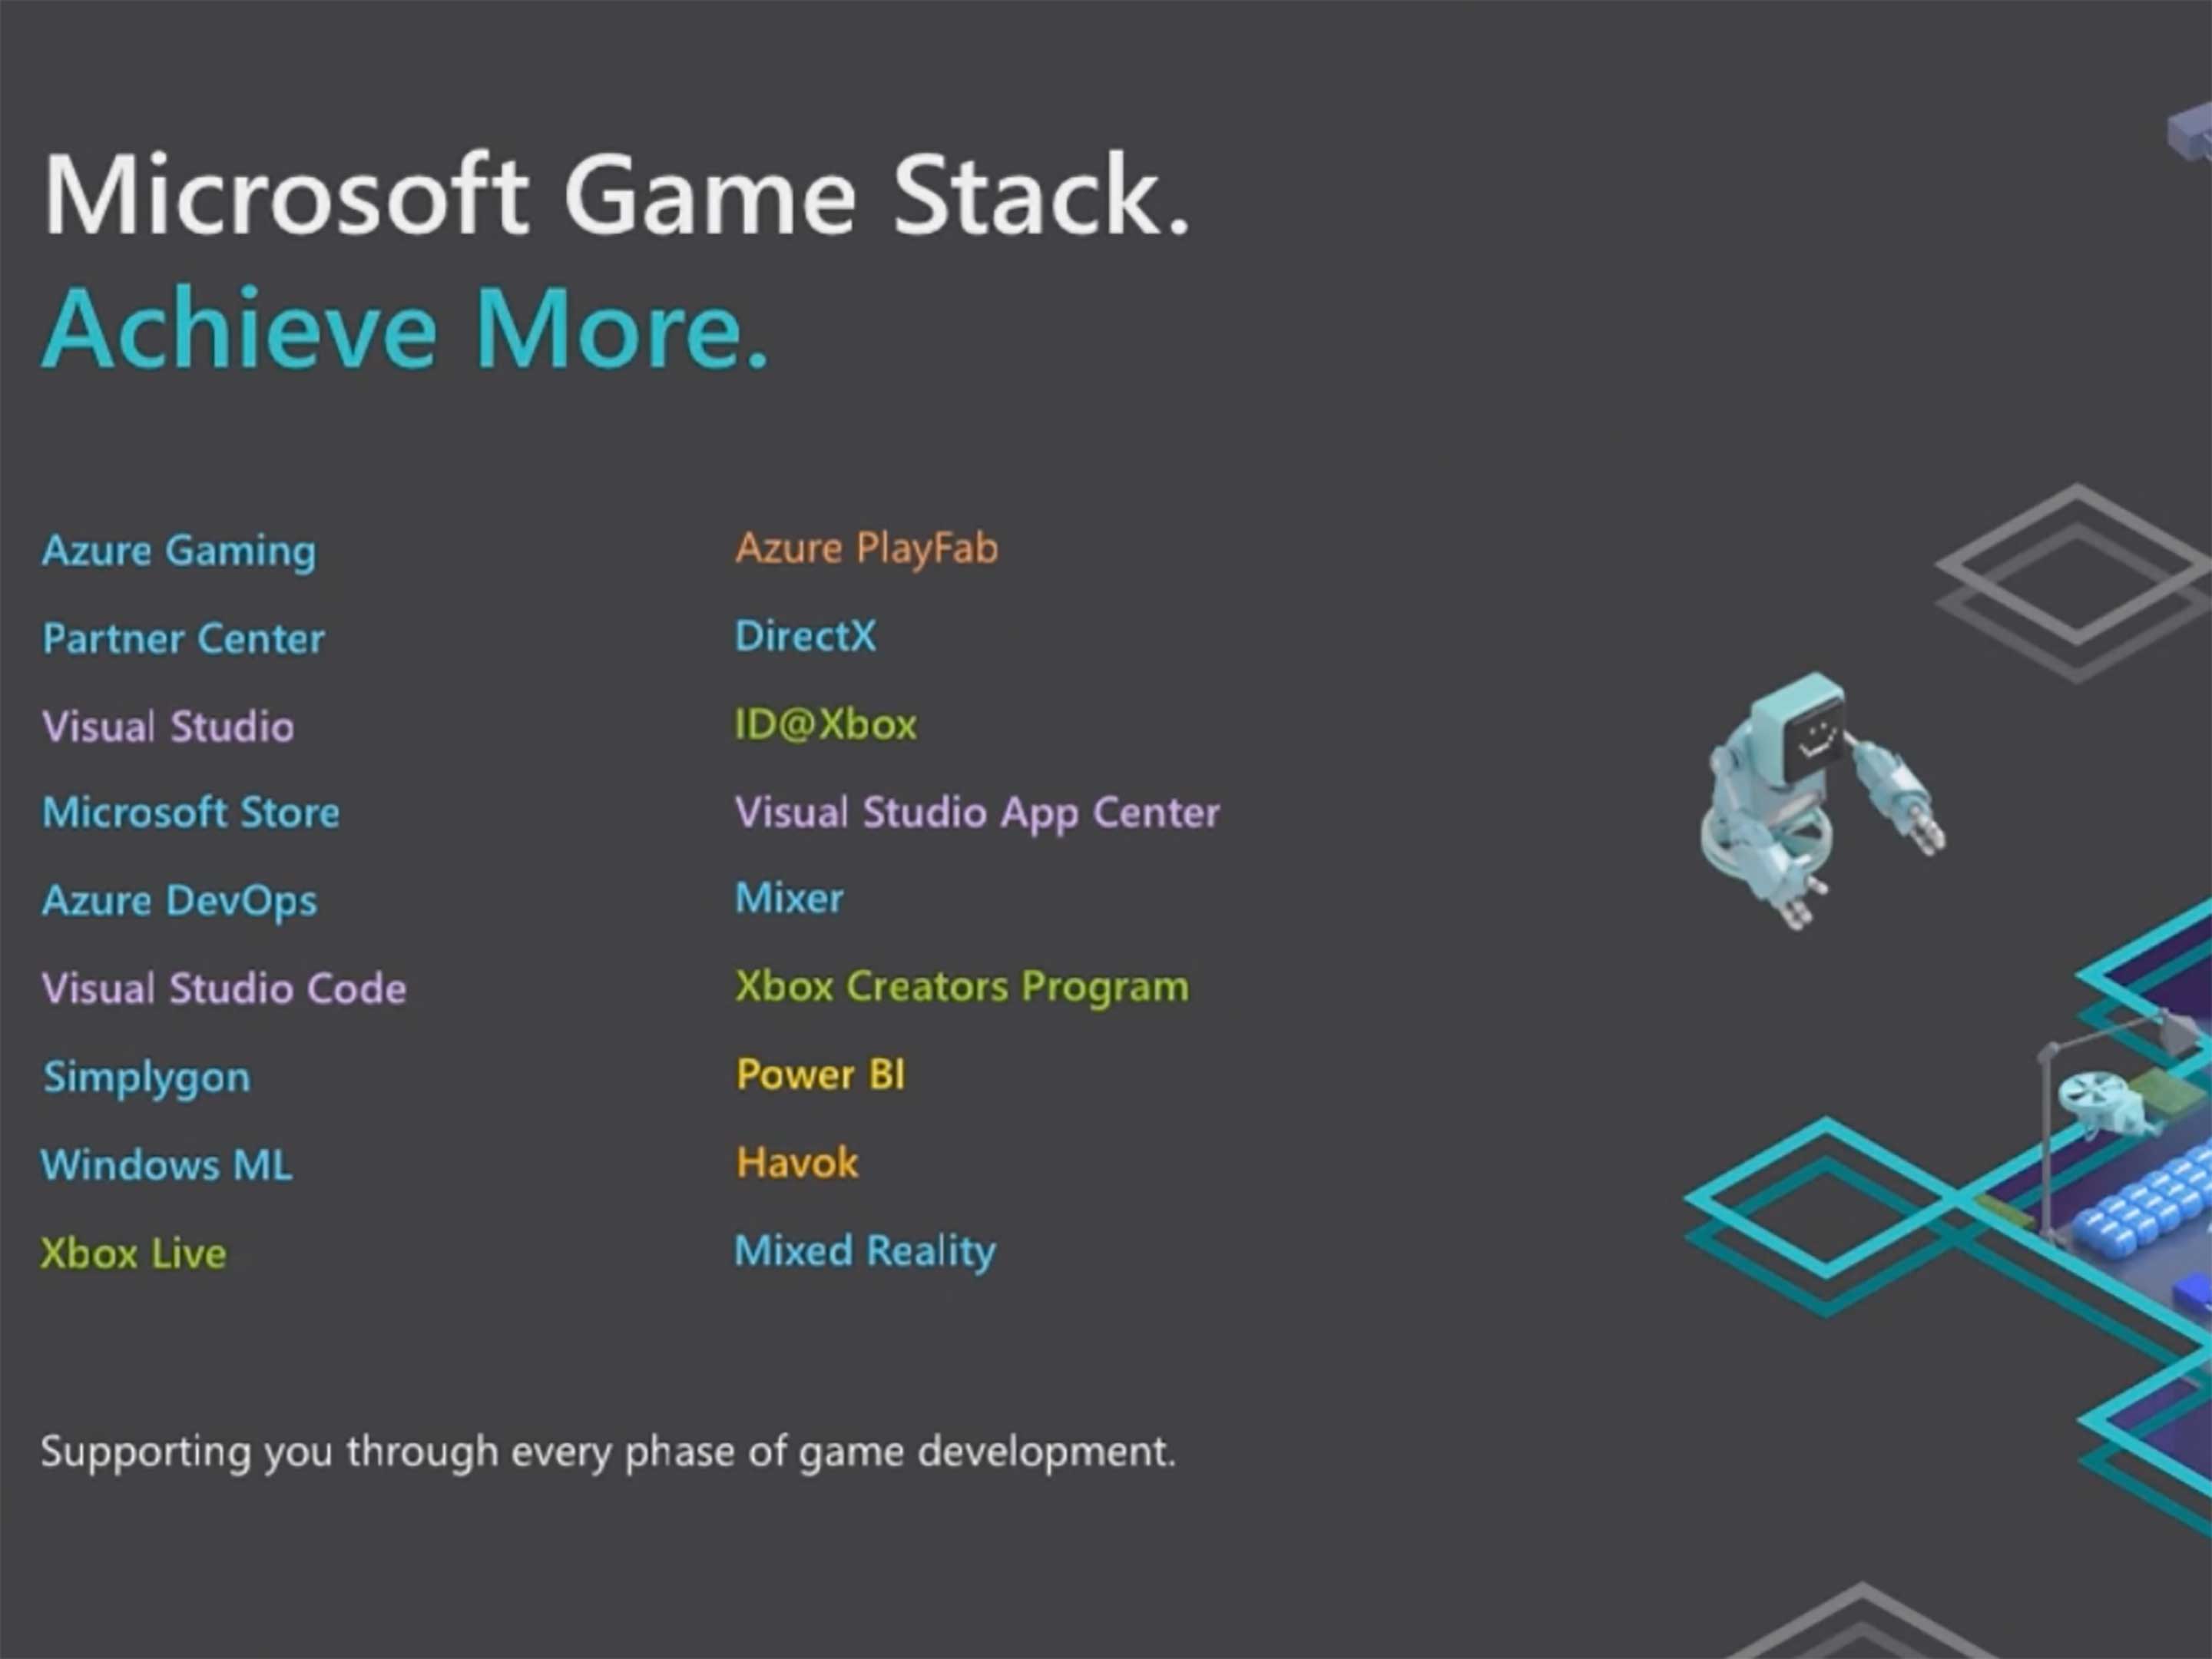 Microsoft Game Stack services